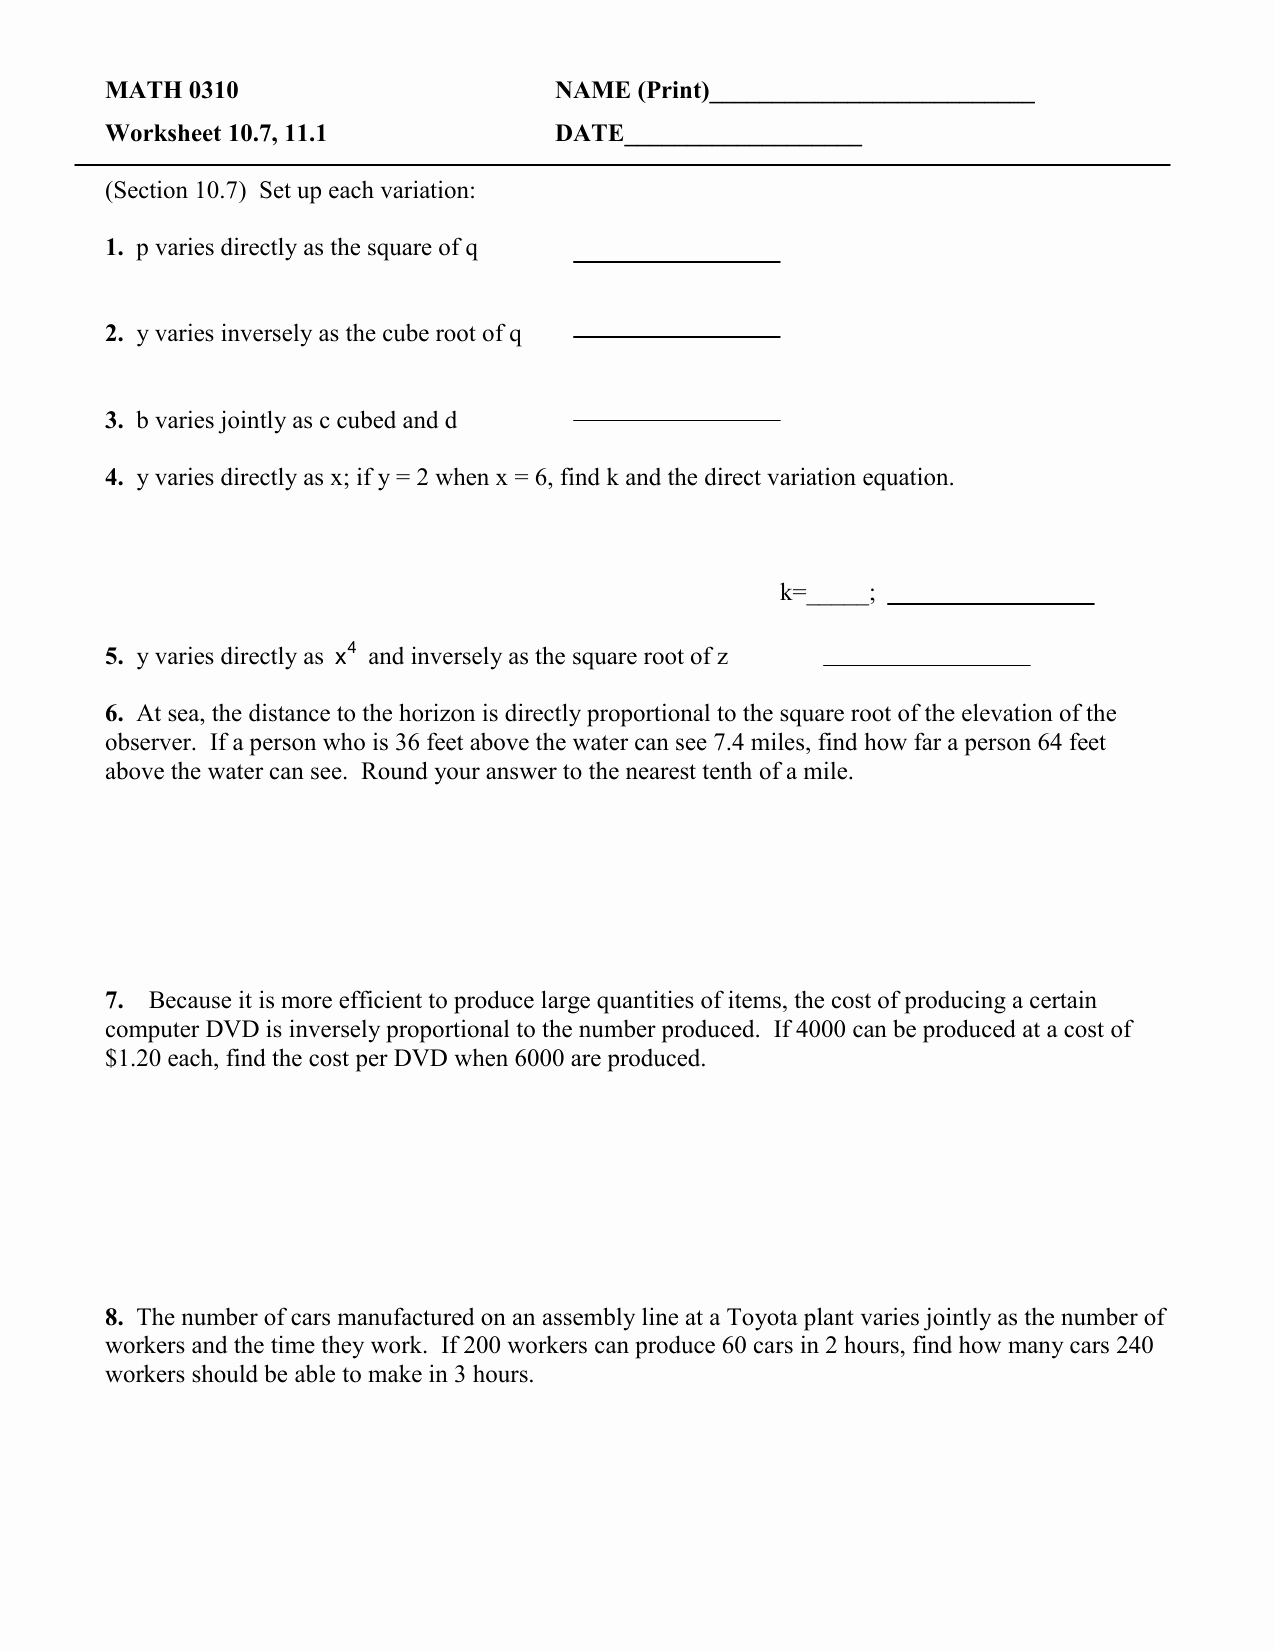 Direct Variation Worksheet with Answers Beautiful Direct and Inverse Variation Worksheet with Answers